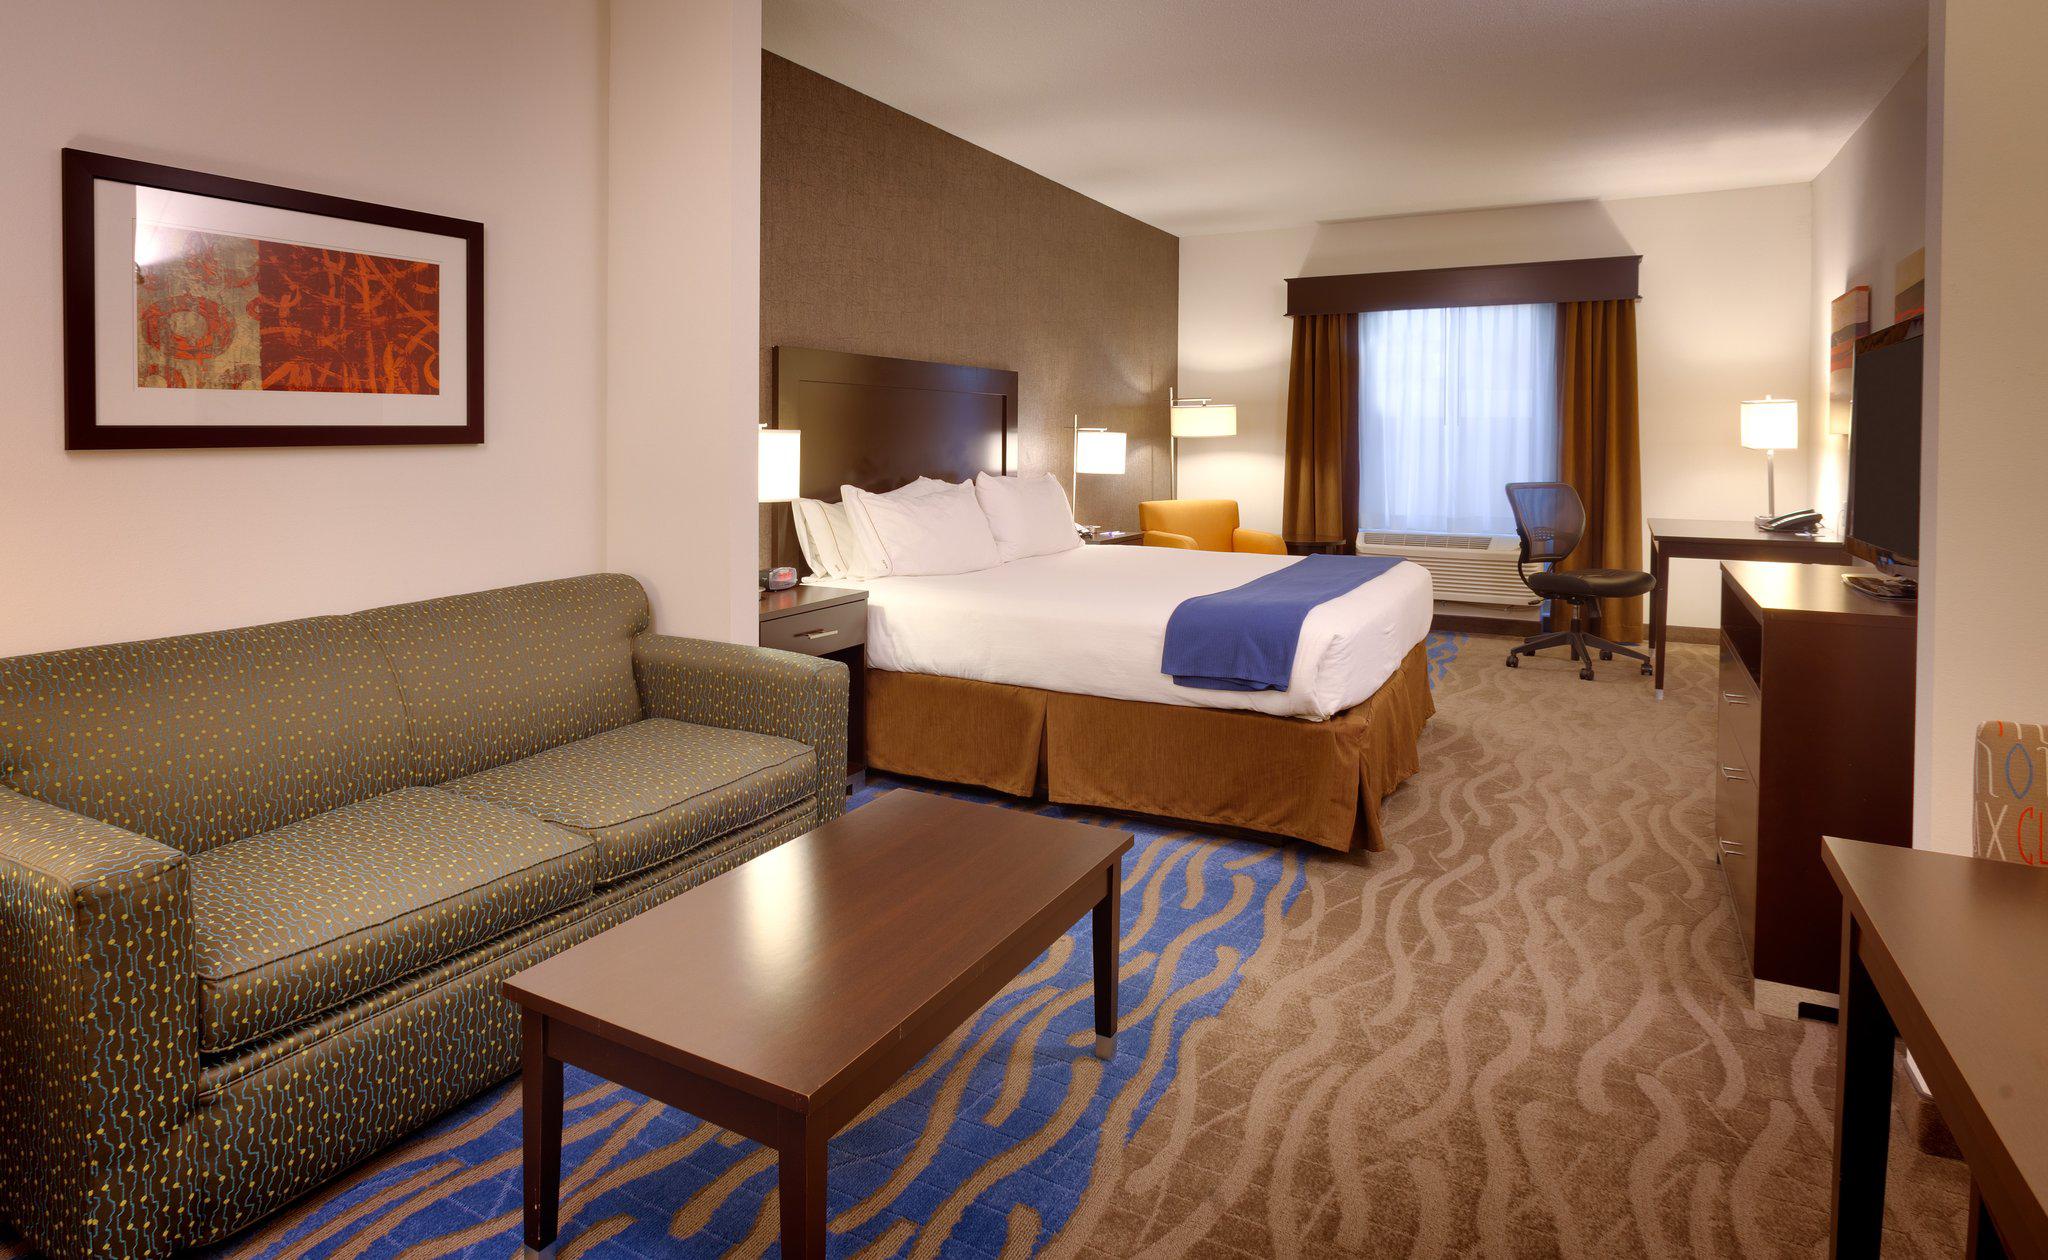 Holiday Inn Express & Suites Overland Park Photo